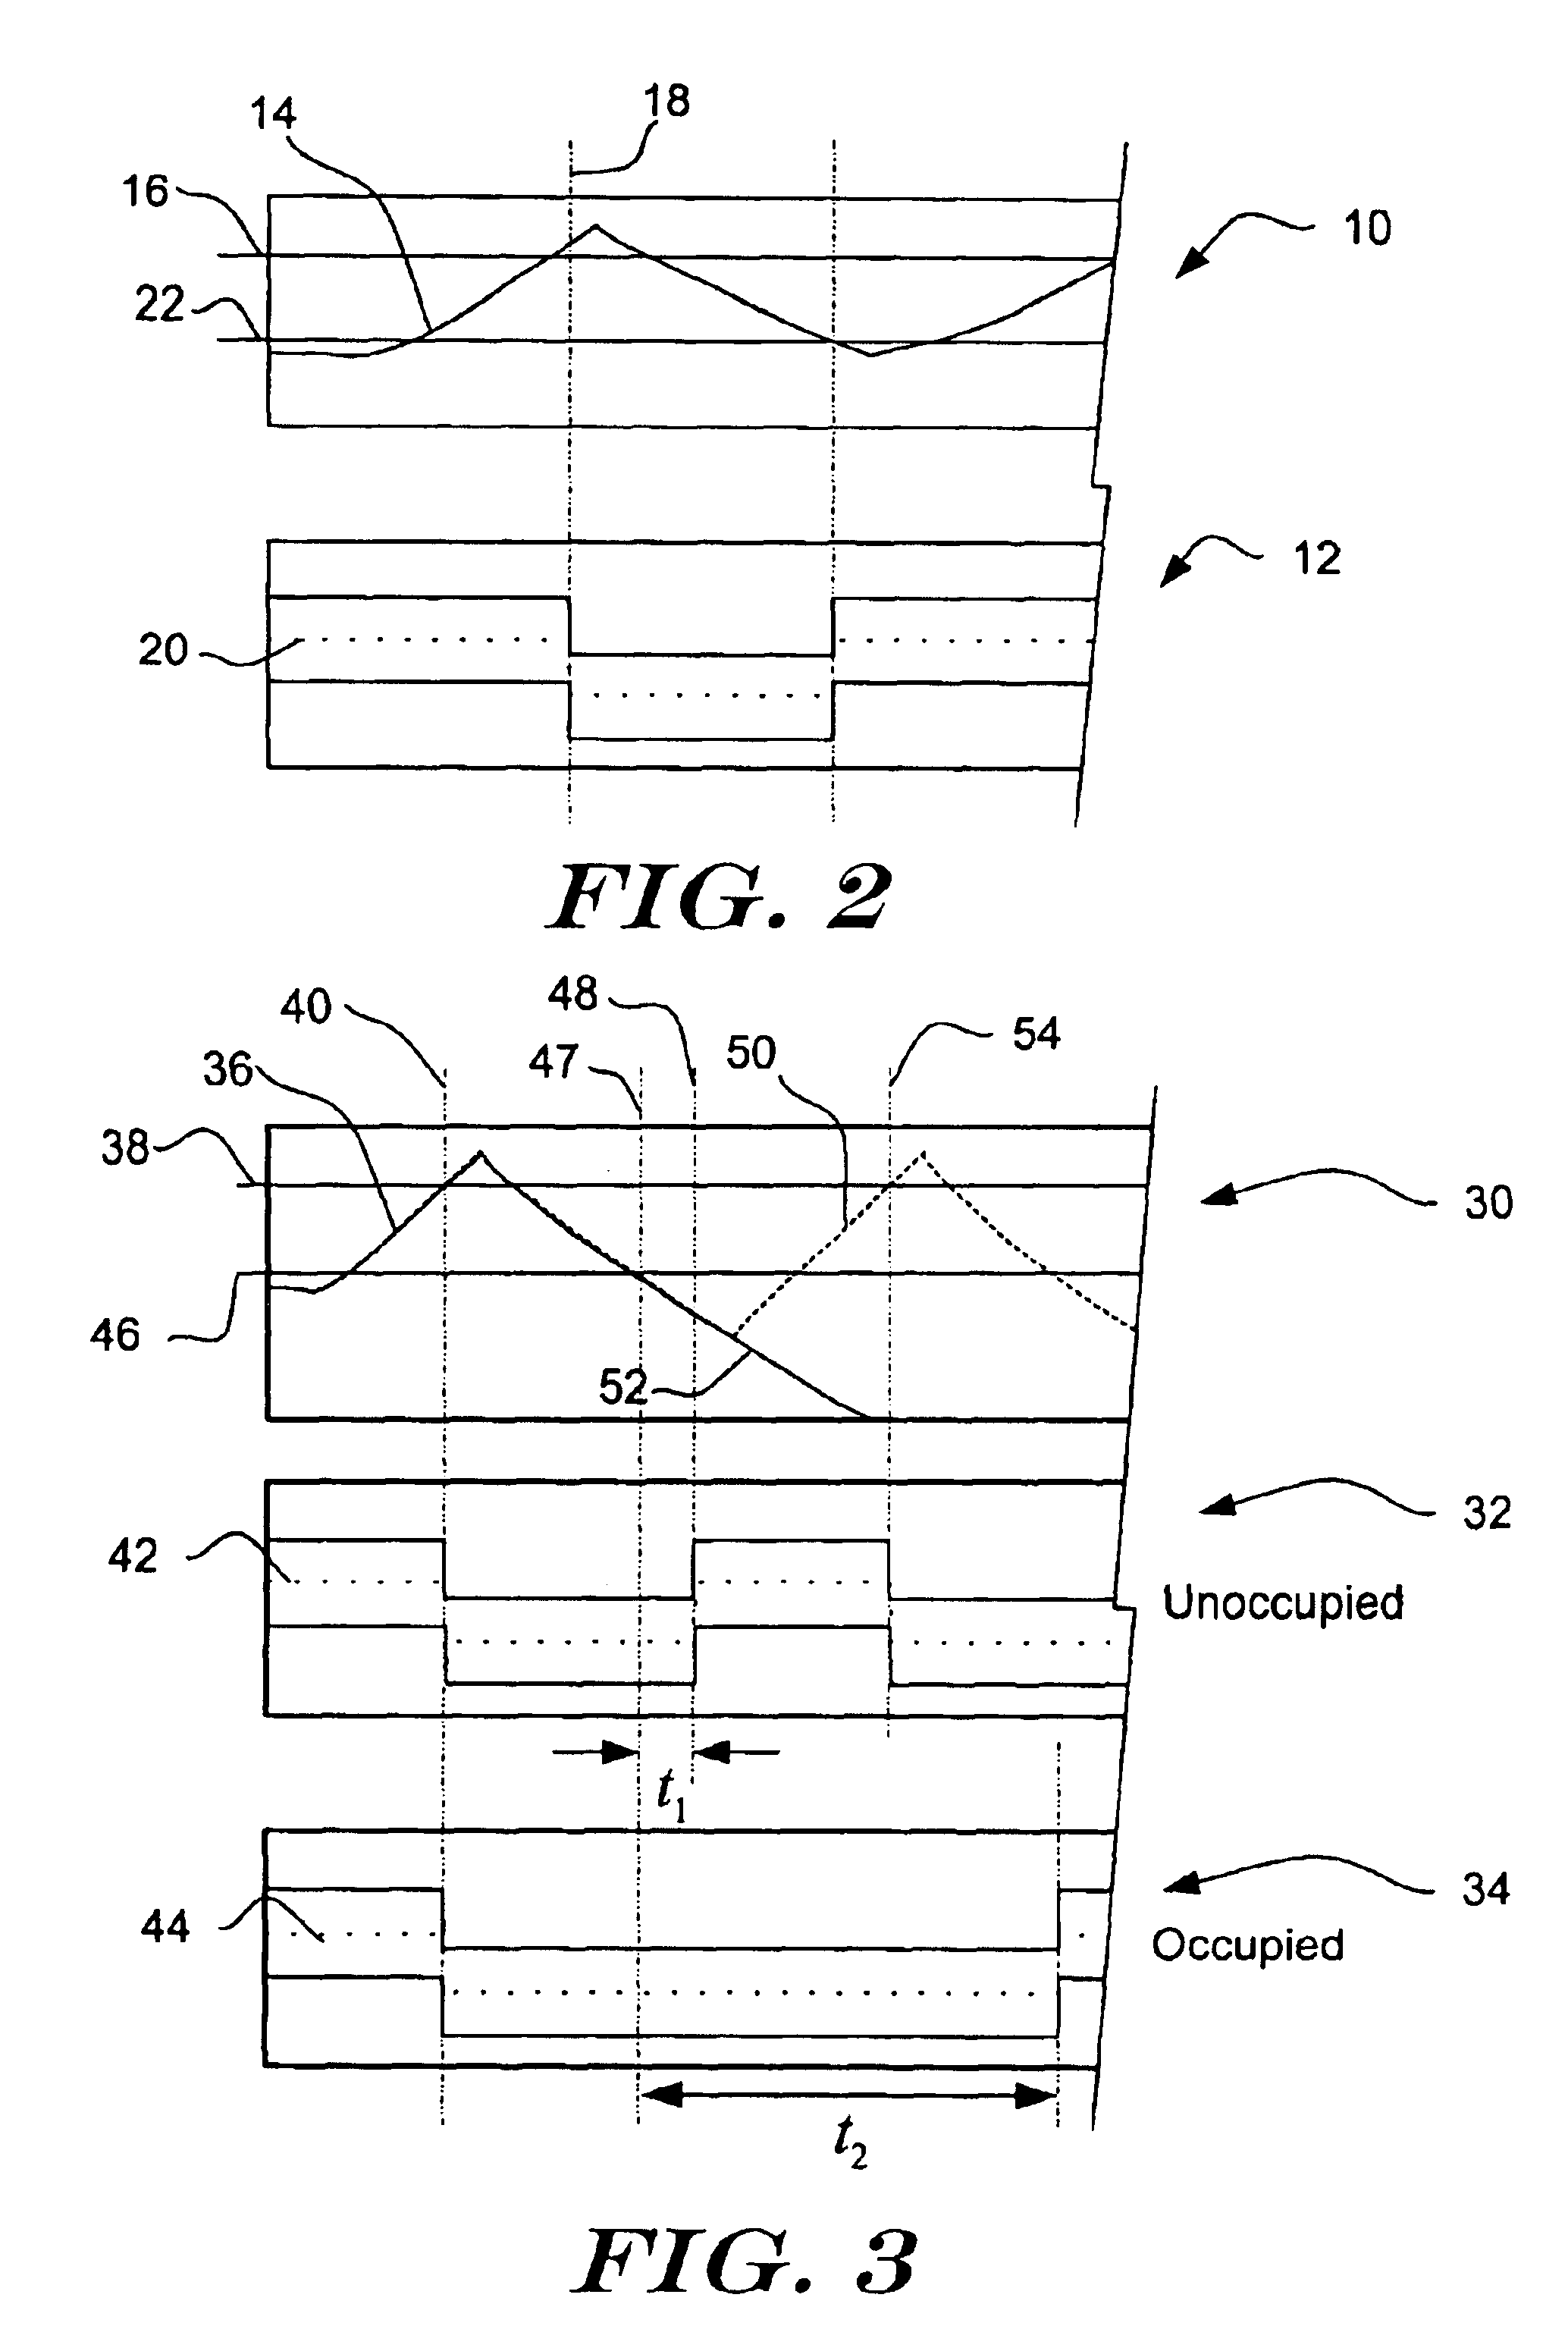 Method and apparatus for adjusting the temperature set point based on humidity level for increased comfort